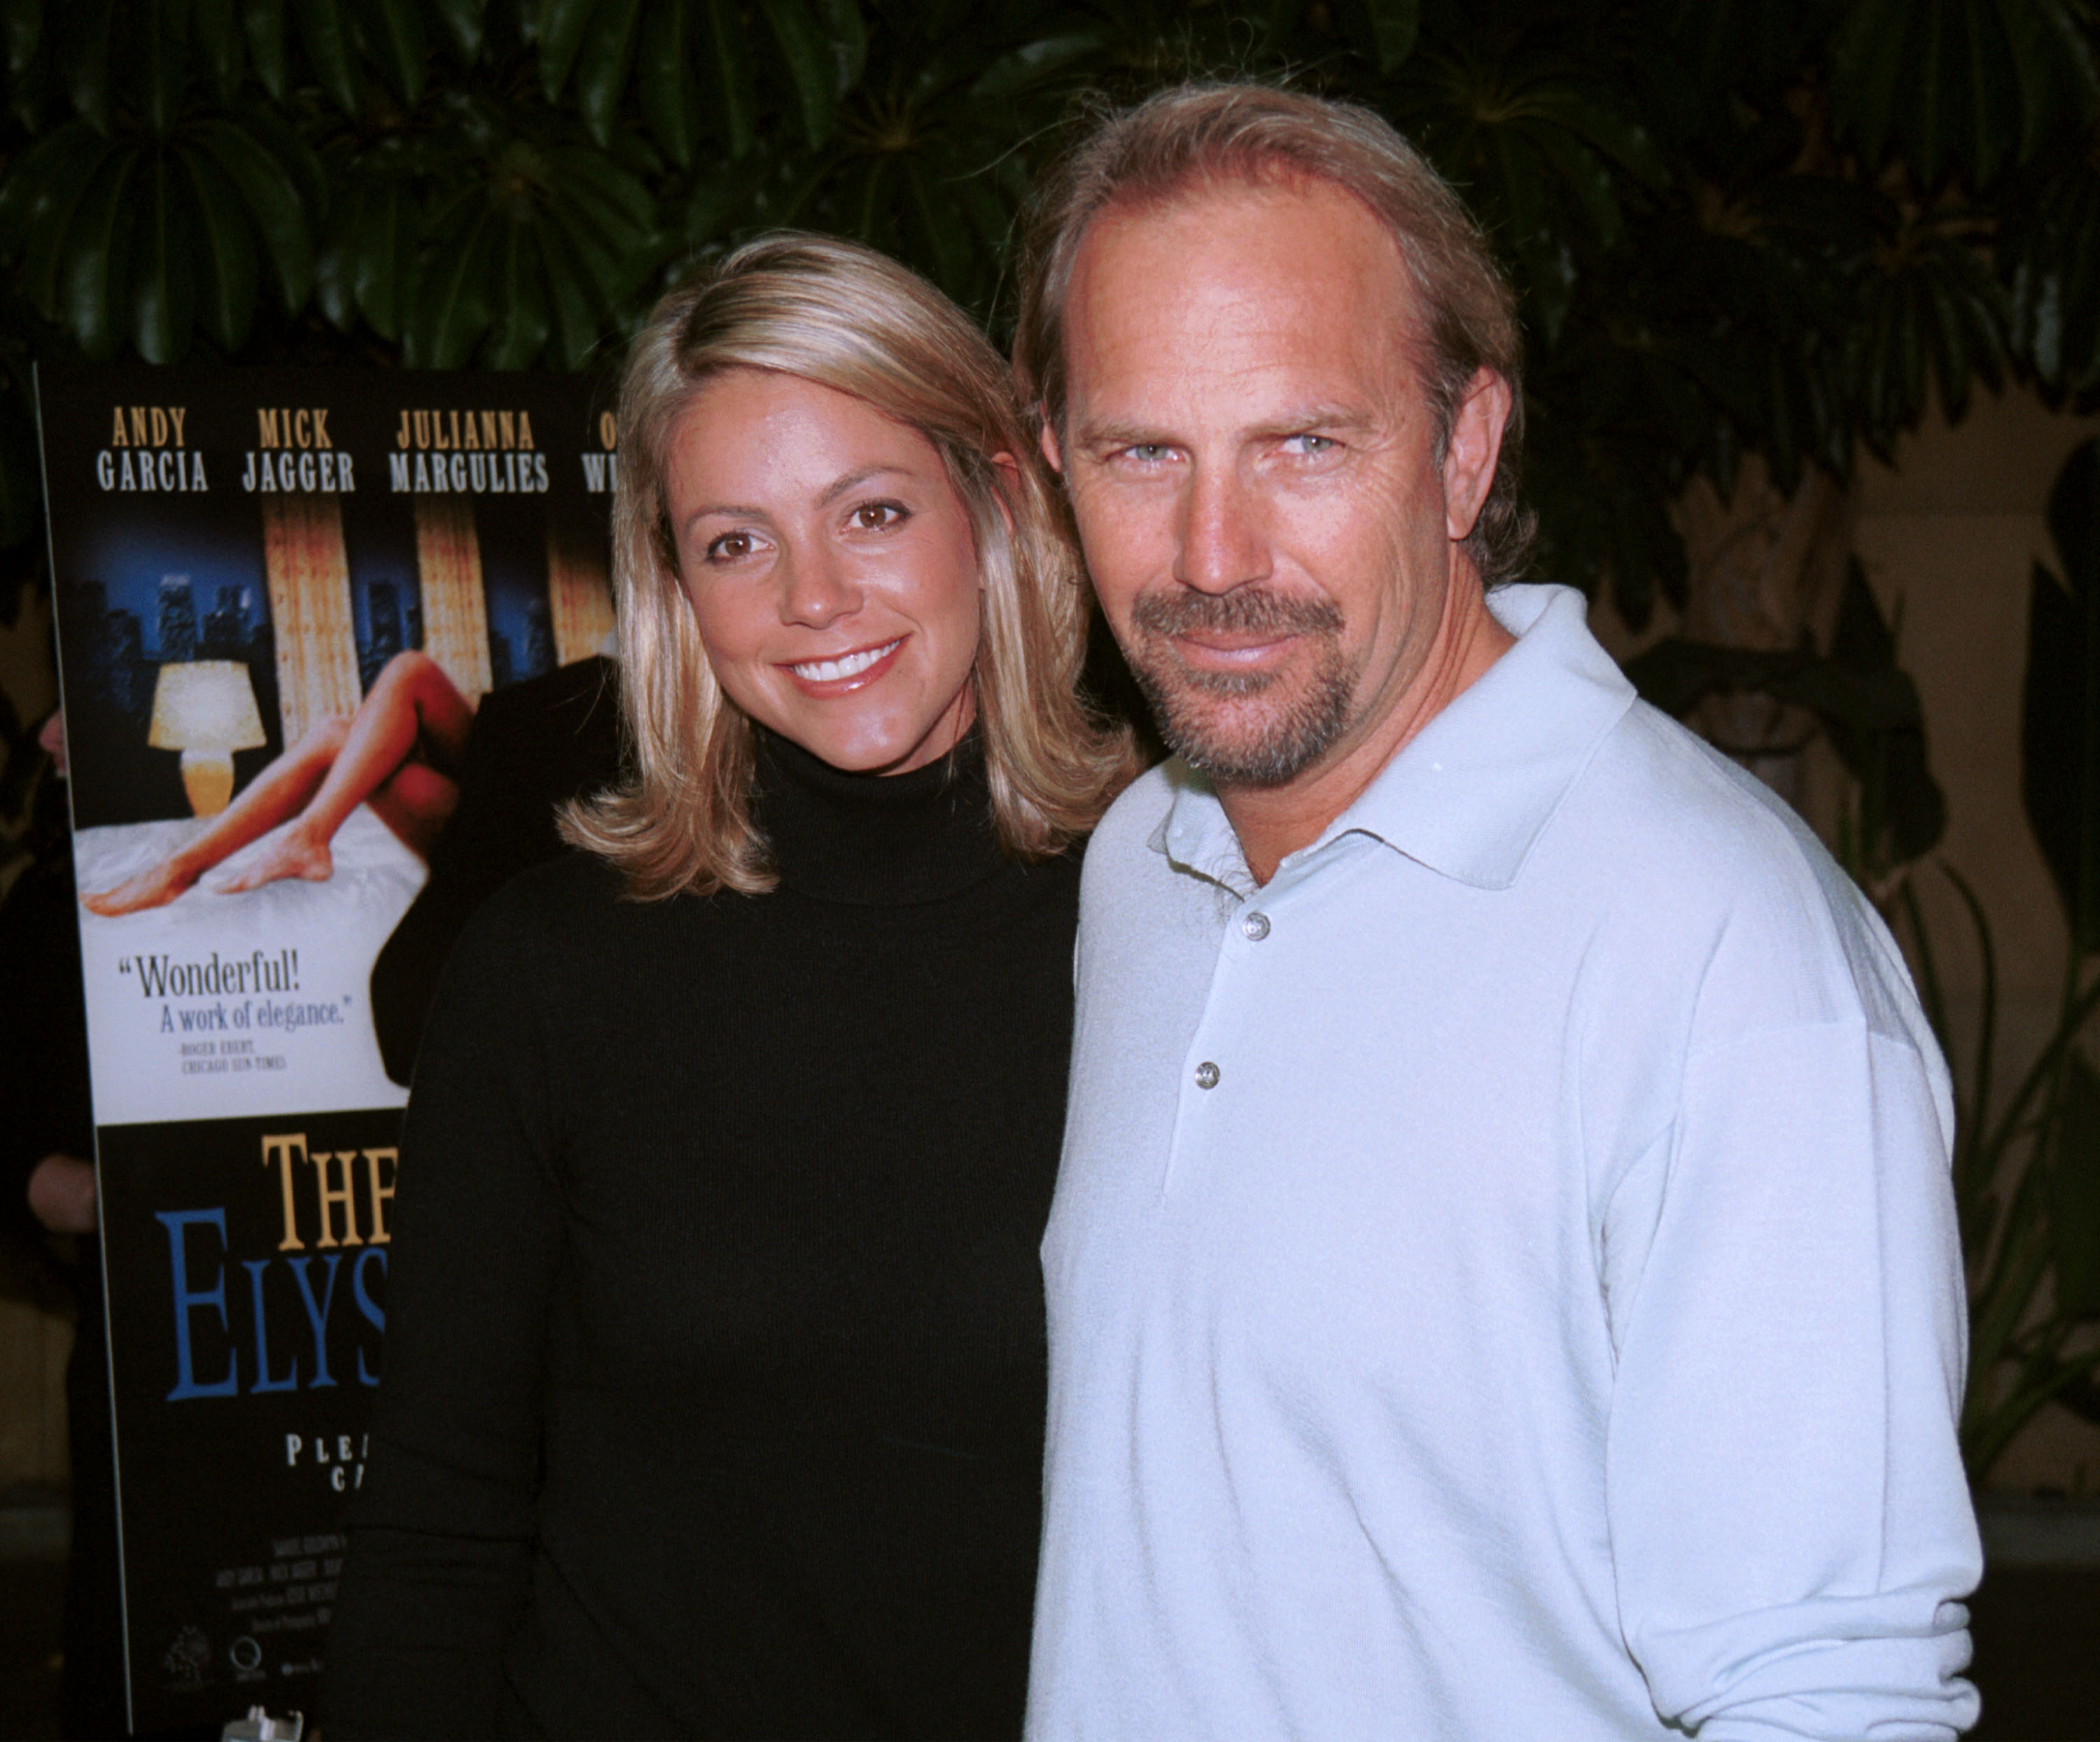 Kevin Costner and his then-girlfriend, Christine Baumgartner, at the premiere of "The Man From Elysian Fields" on September 23, 2002 in Los Angeles, California | Source: Getty Images